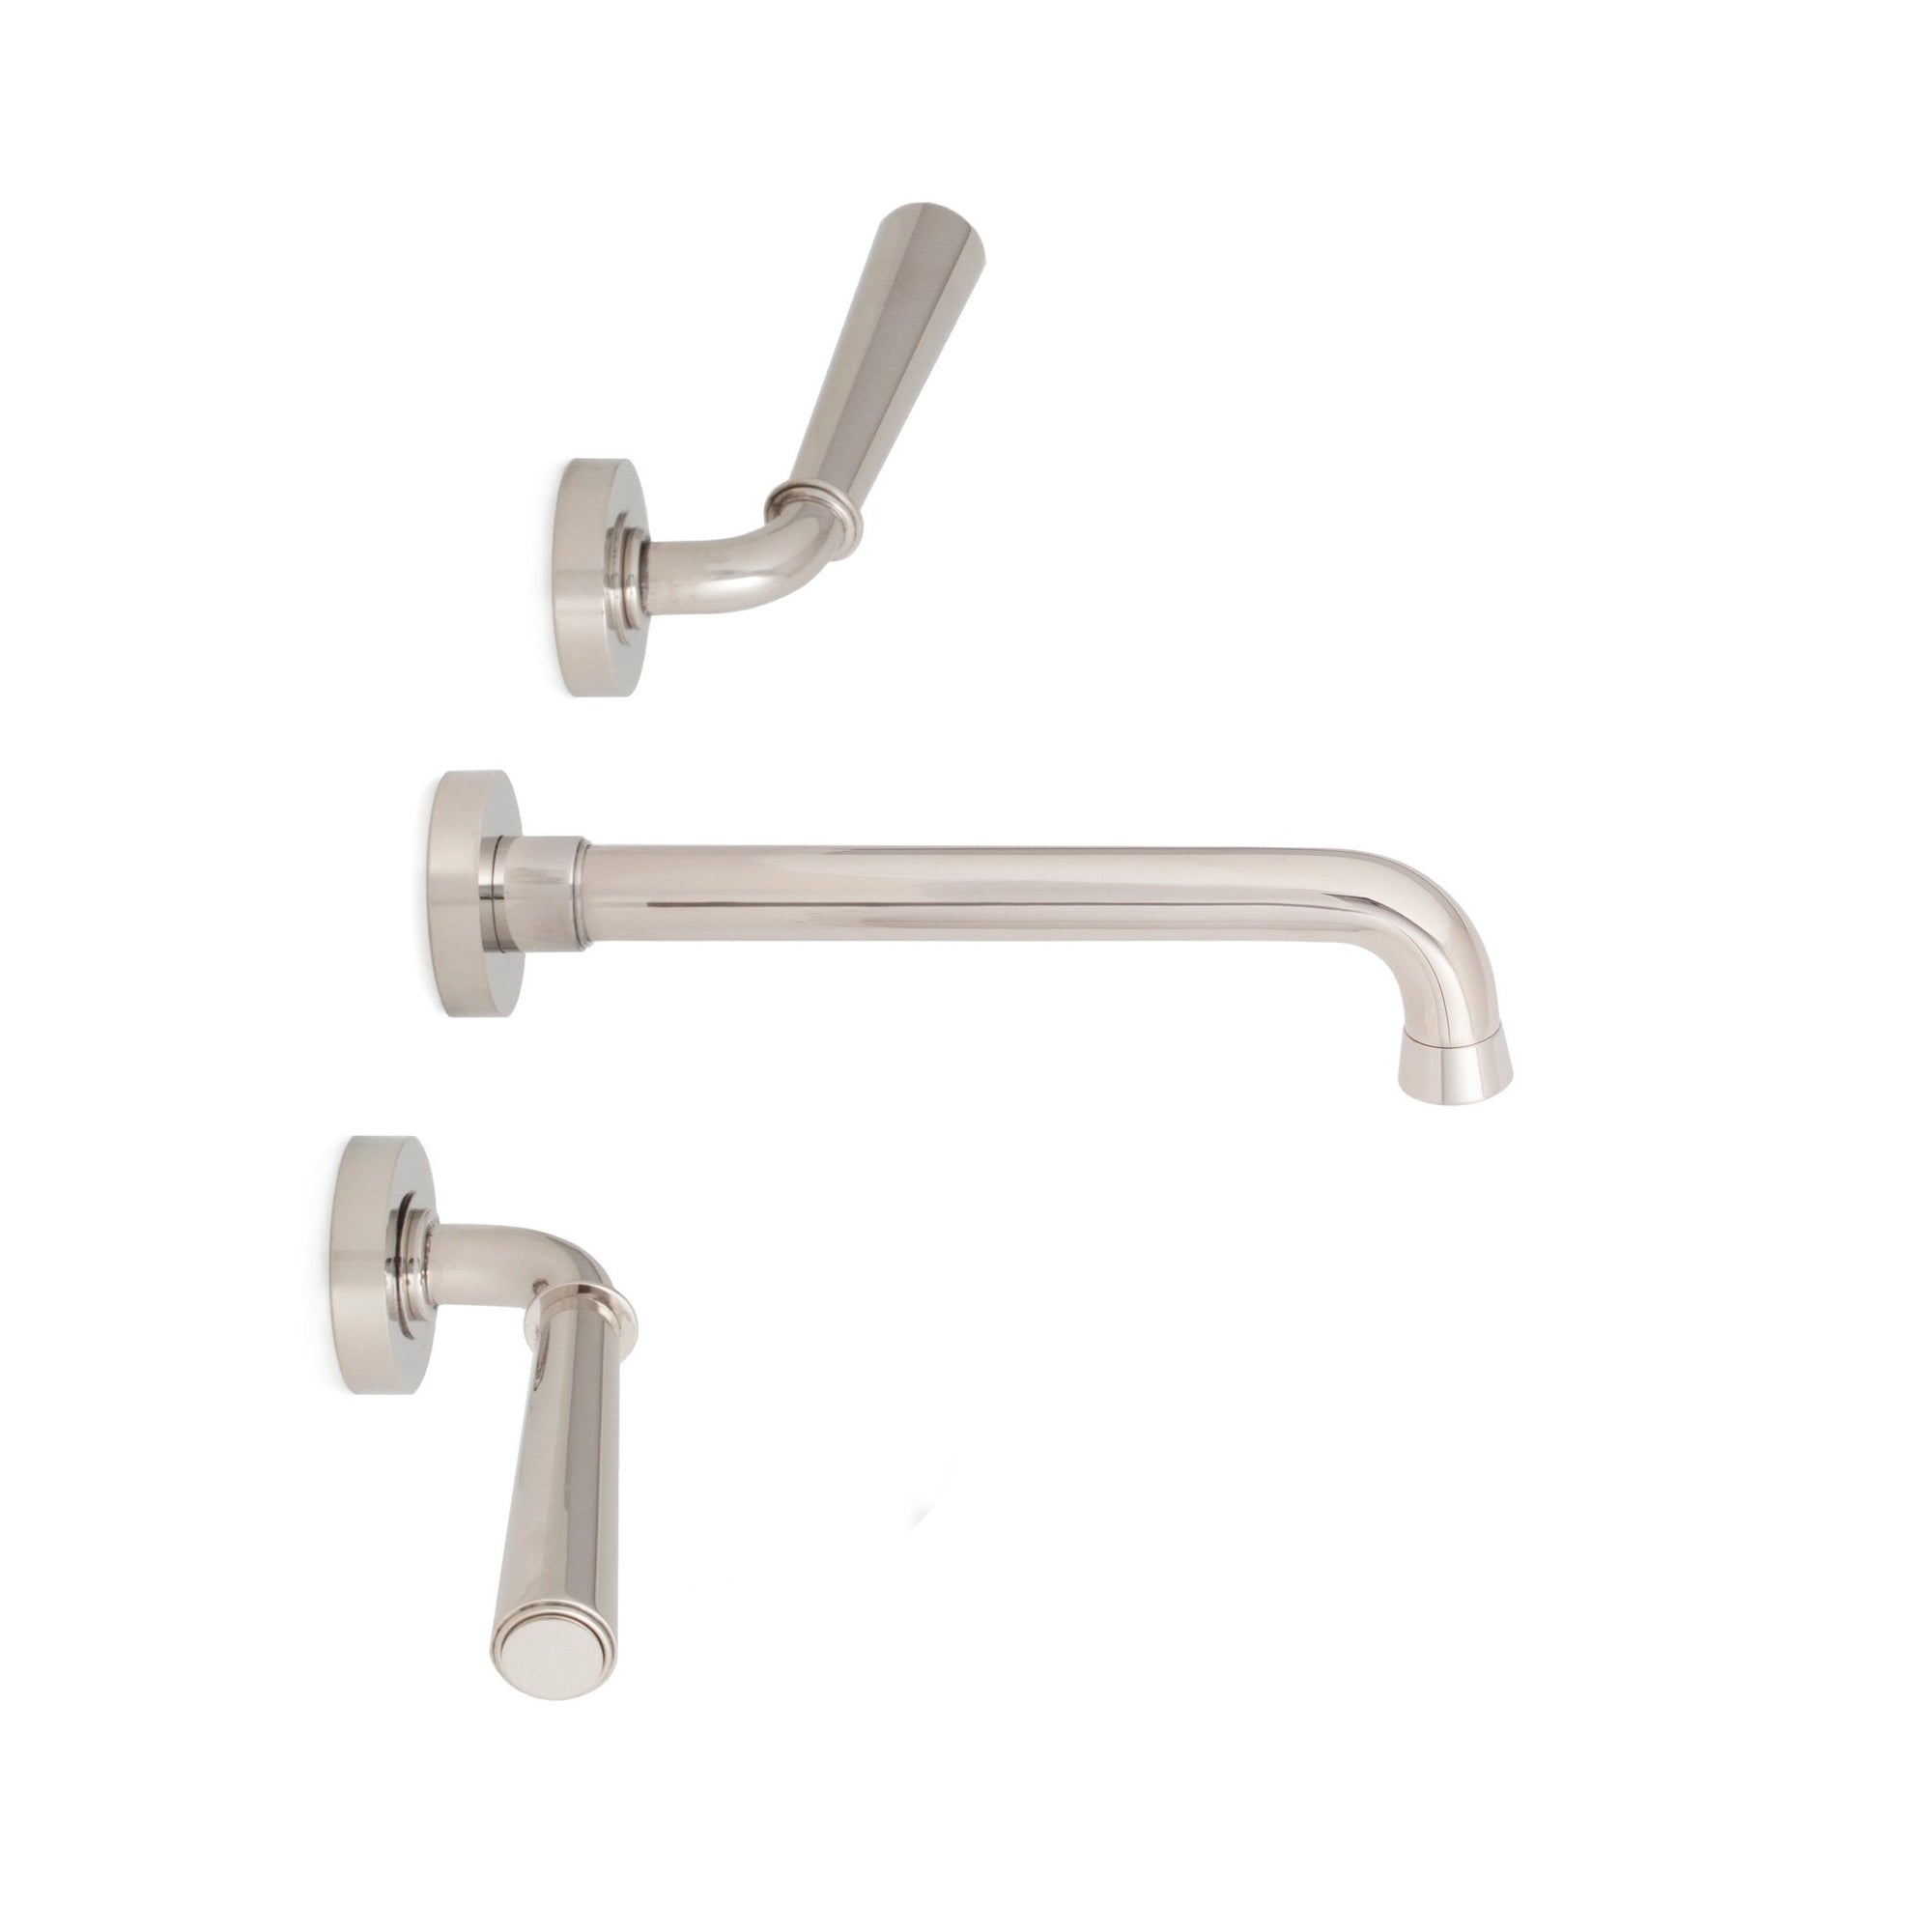 2070WBS806-HP Sherle Wagner International Dorian Lever Wall Mount Faucet Set in High Polished Platinum metal finish